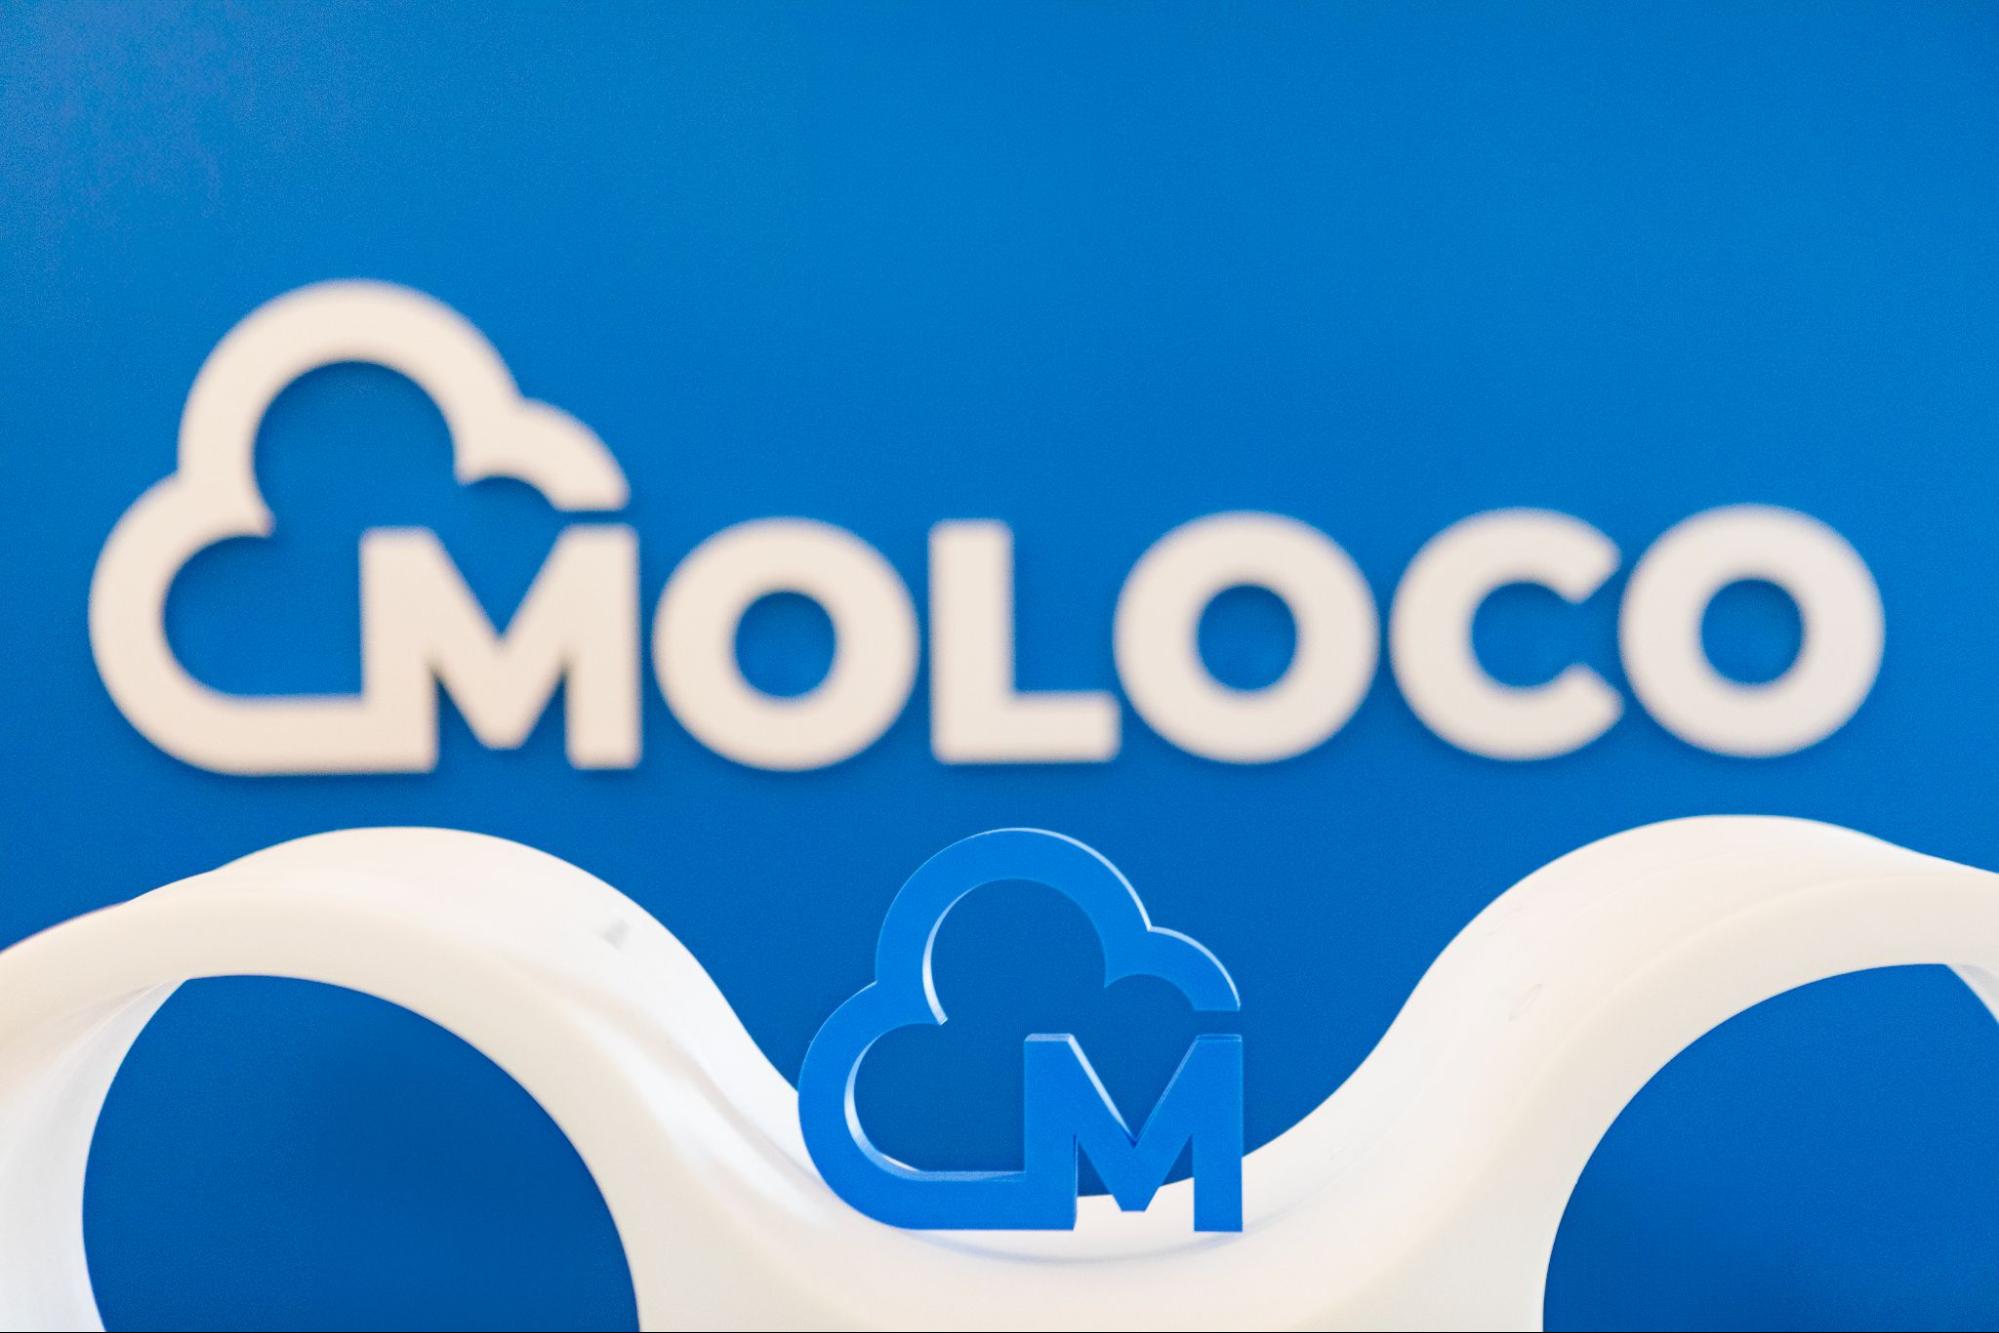 Unveiling the new Moloco product names